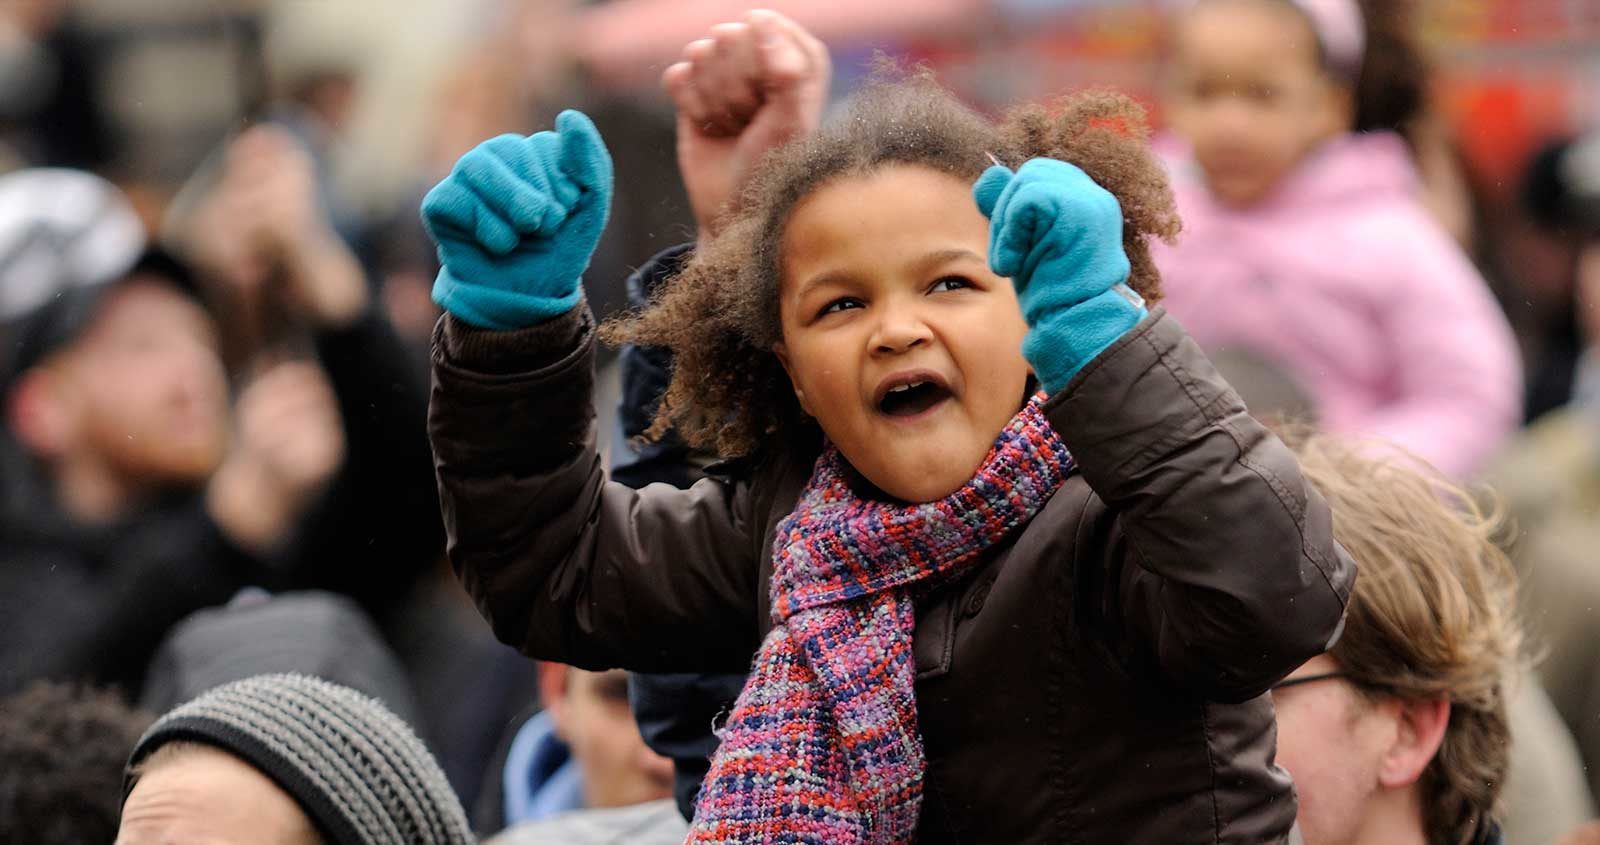 A girl with her fists in the air, on someon's shoulders in a protest